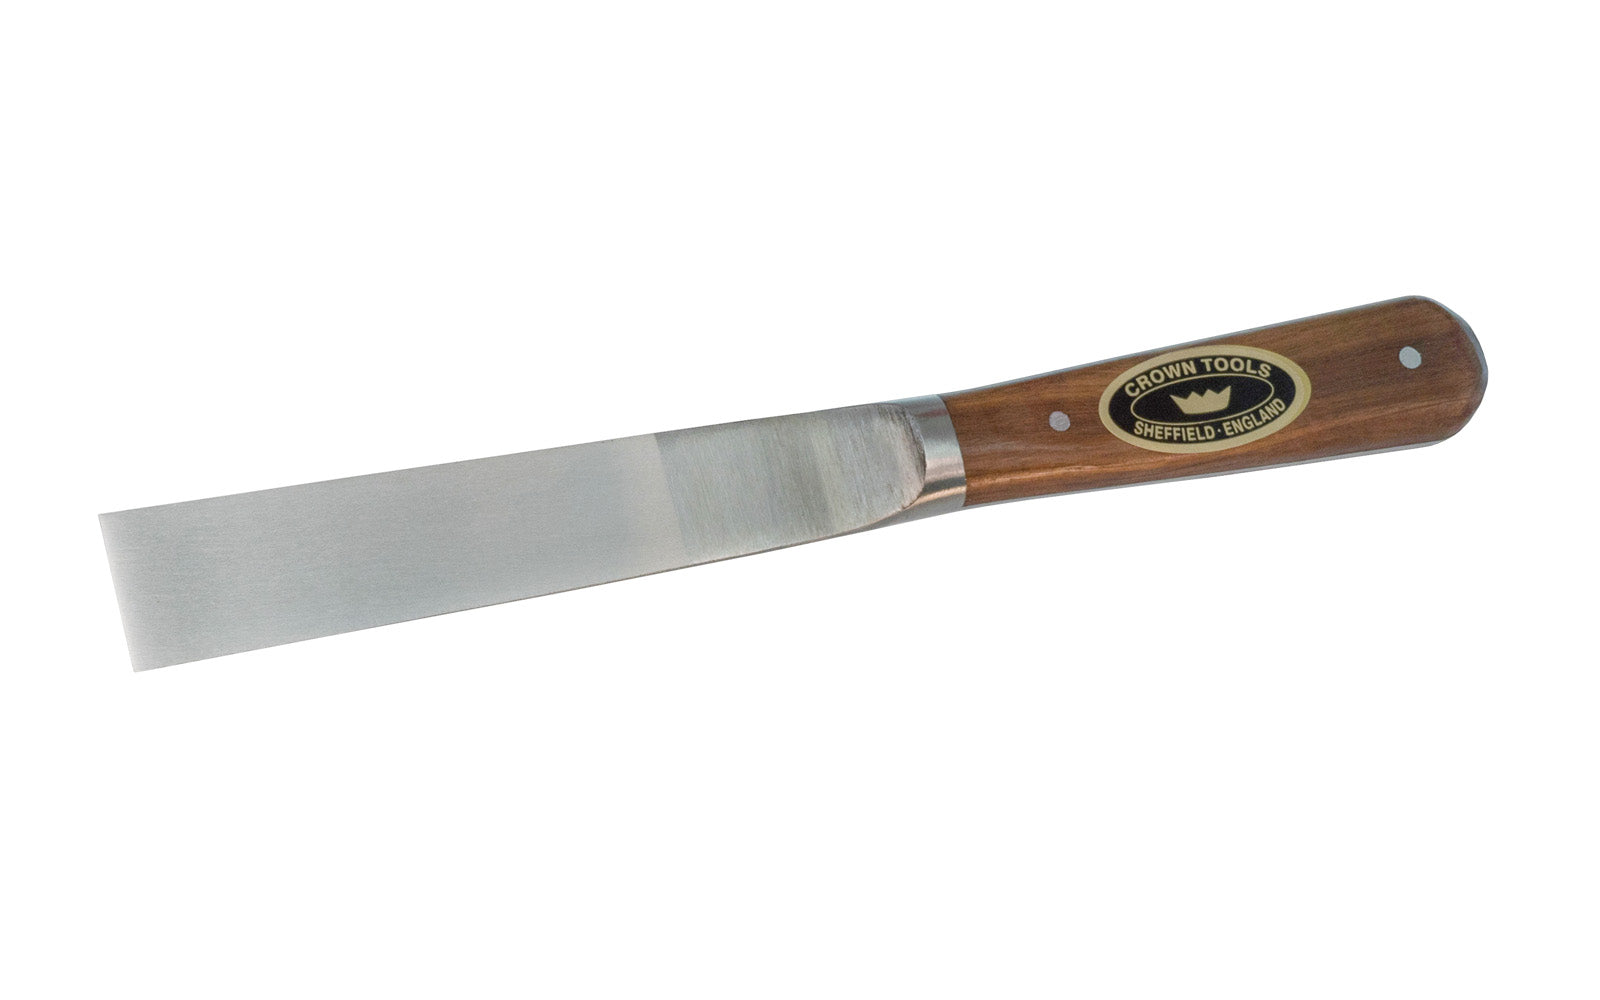 Crown Tools 1" (25 mm) Filing Knife with a flexible spring-tempered blade. High quality putty knife for filing holes, cracks, etc. Walnut wood handle. Made in Sheffield, England.